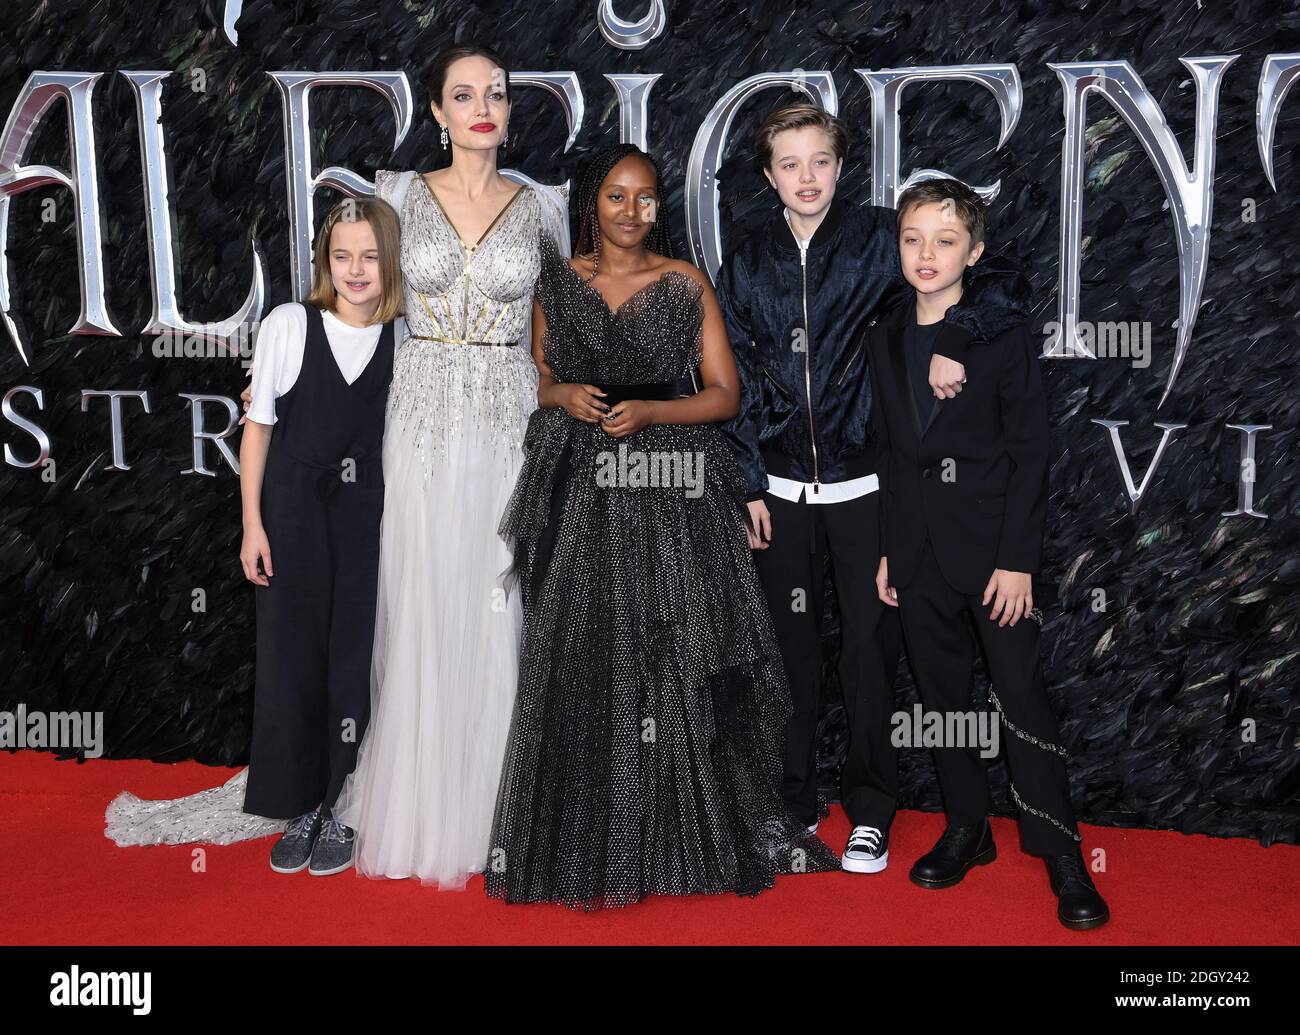 Vivienne Marcheline Jolie-Pitt, Angelina Jolie, Zahara Marley Jolie-Pitt, Shiloh Nouvel Jolie-Pitt and Knox Jolie-Pitt attending the European premiere of Maleficent: Mistress of Evil, held at the Odeon IMAX Waterloo, in London. Picture credit should read: Doug Peters/EMPICS Stock Photo